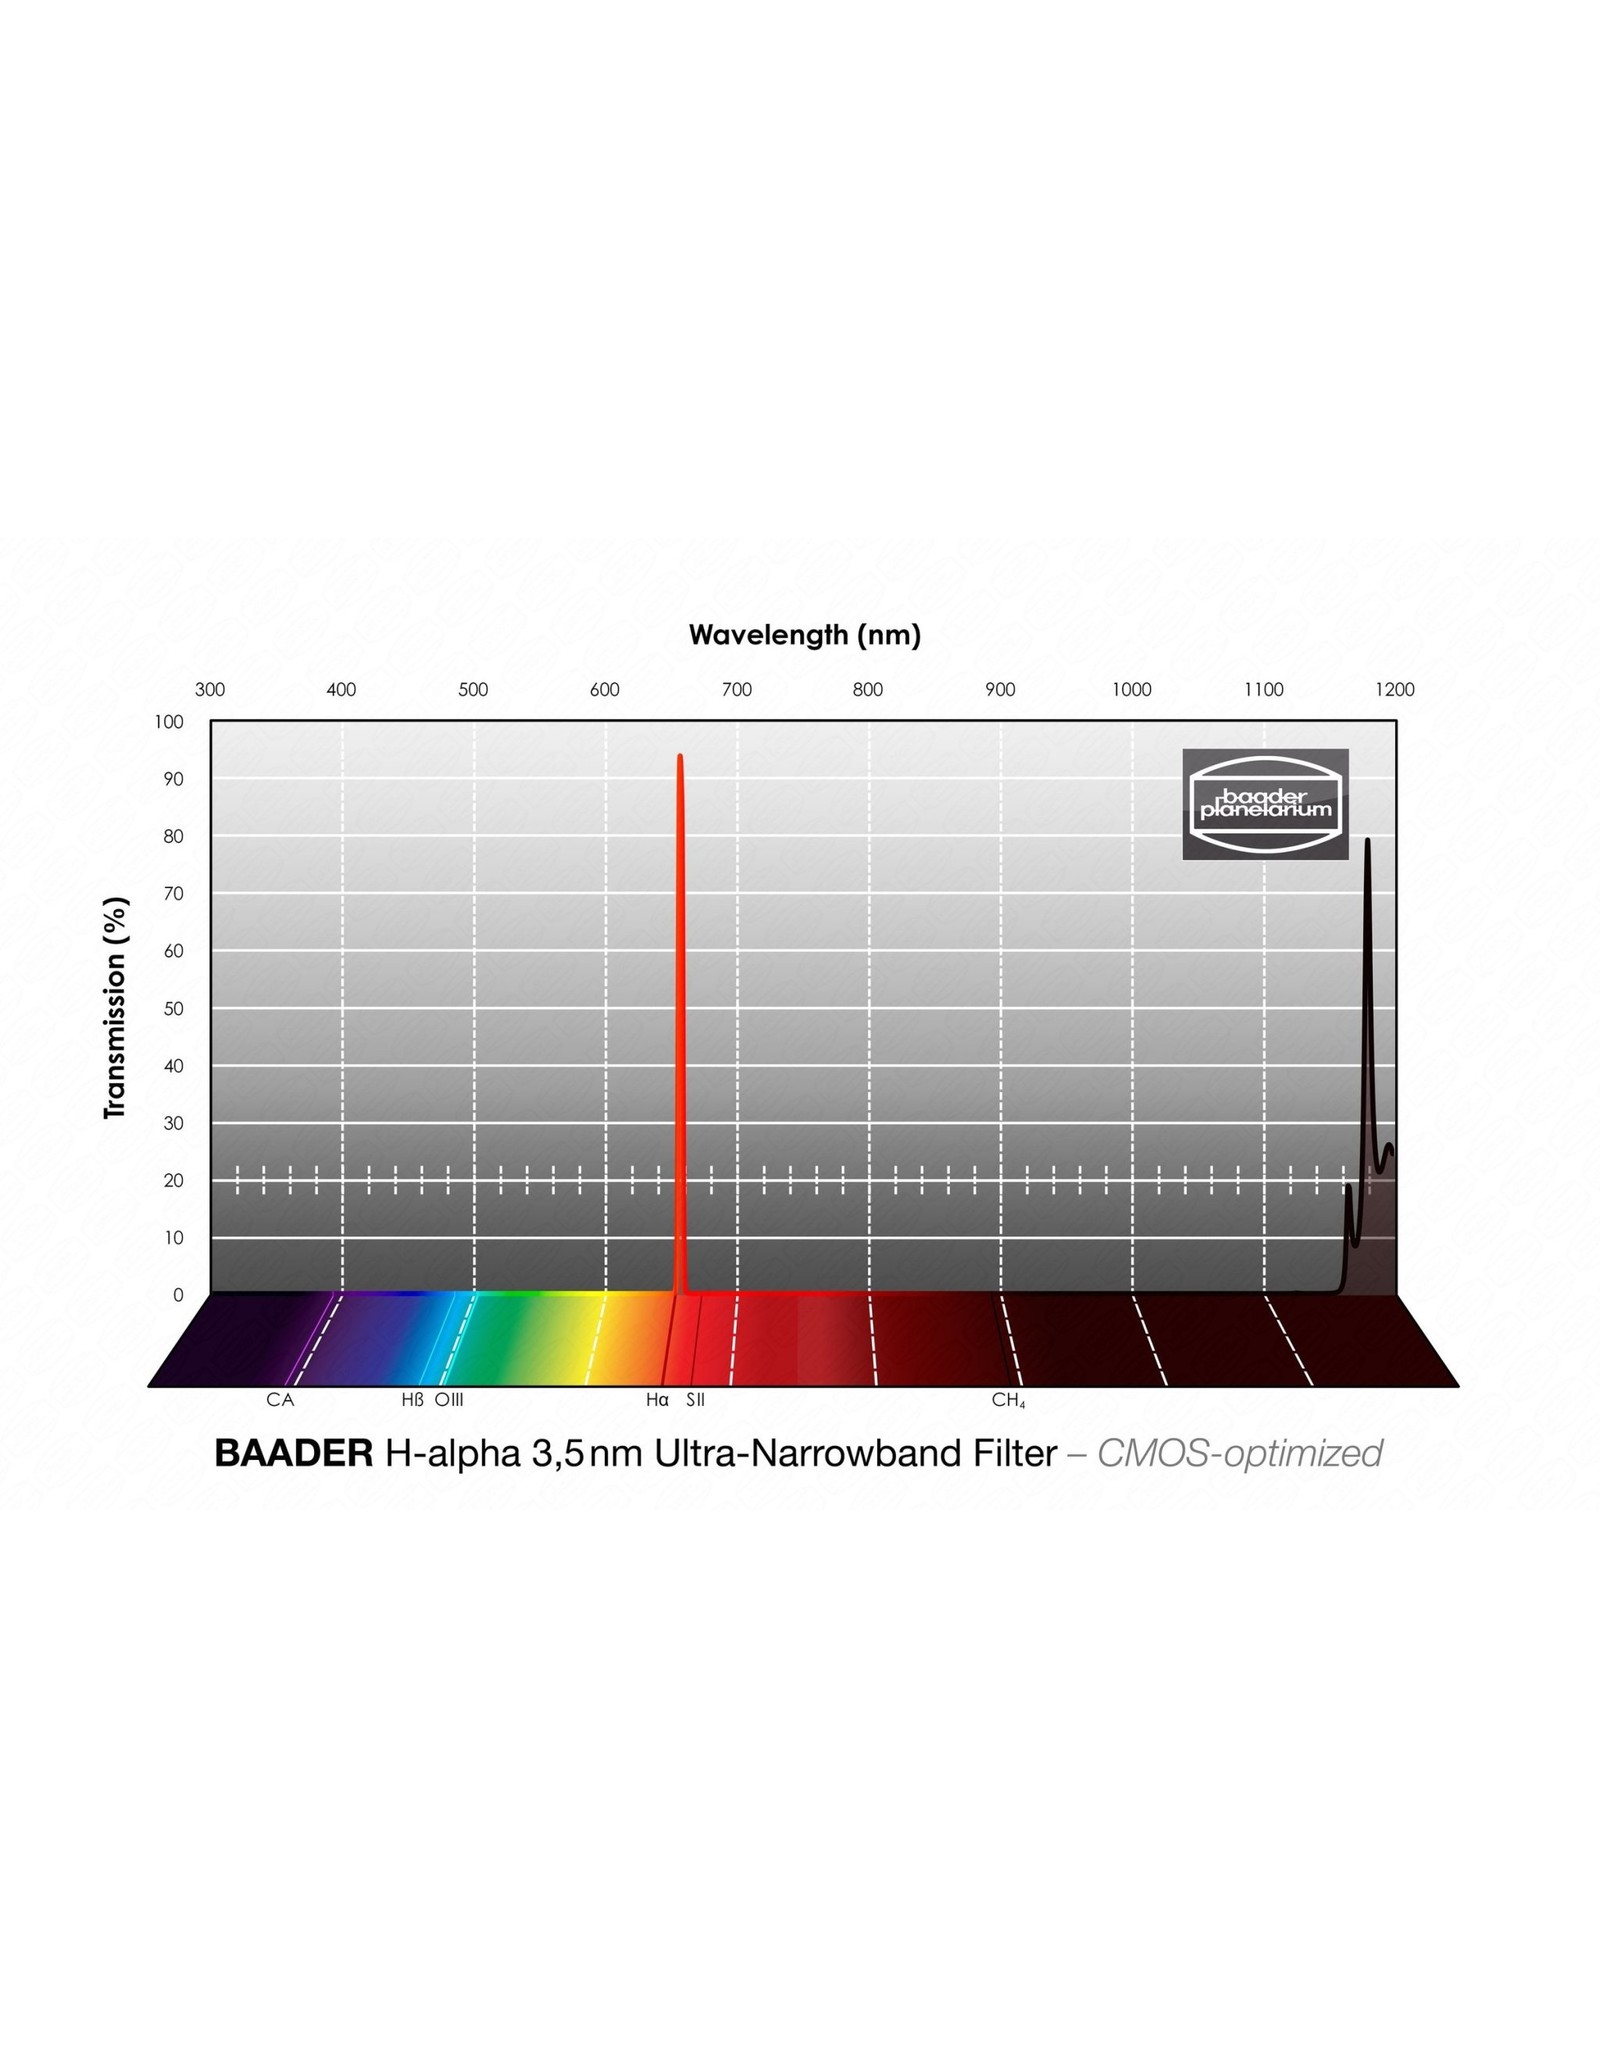 Baader Planetarium Baader 4nm Ultra-Narrowband Sulfur-II Filters – CMOS-optimized (Specify Size)